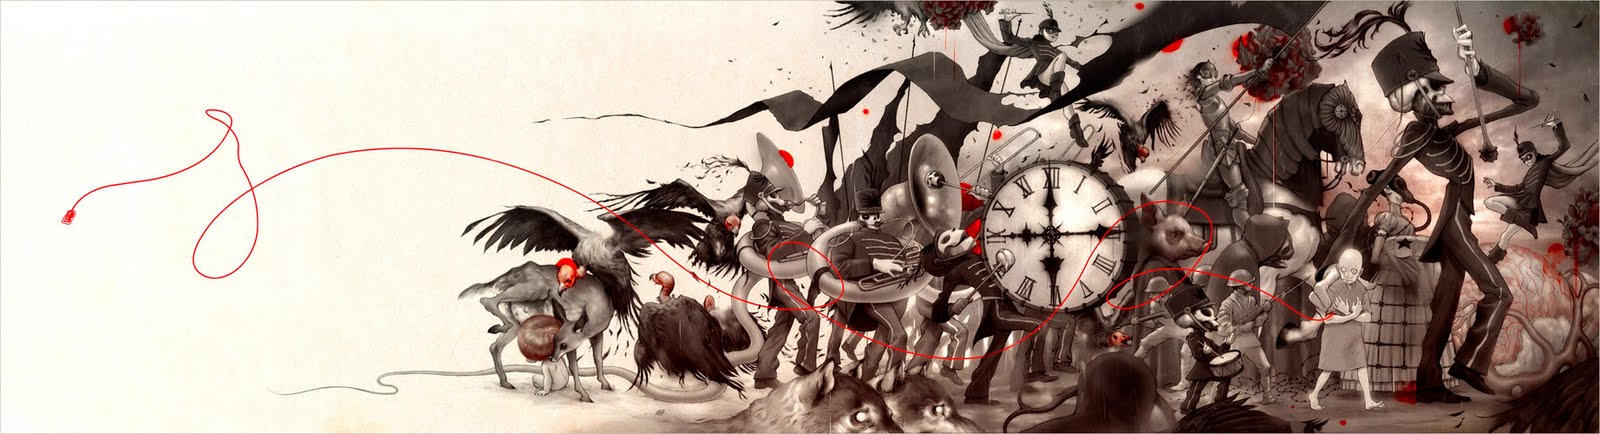 Super Punch The Black Parade By James Jean